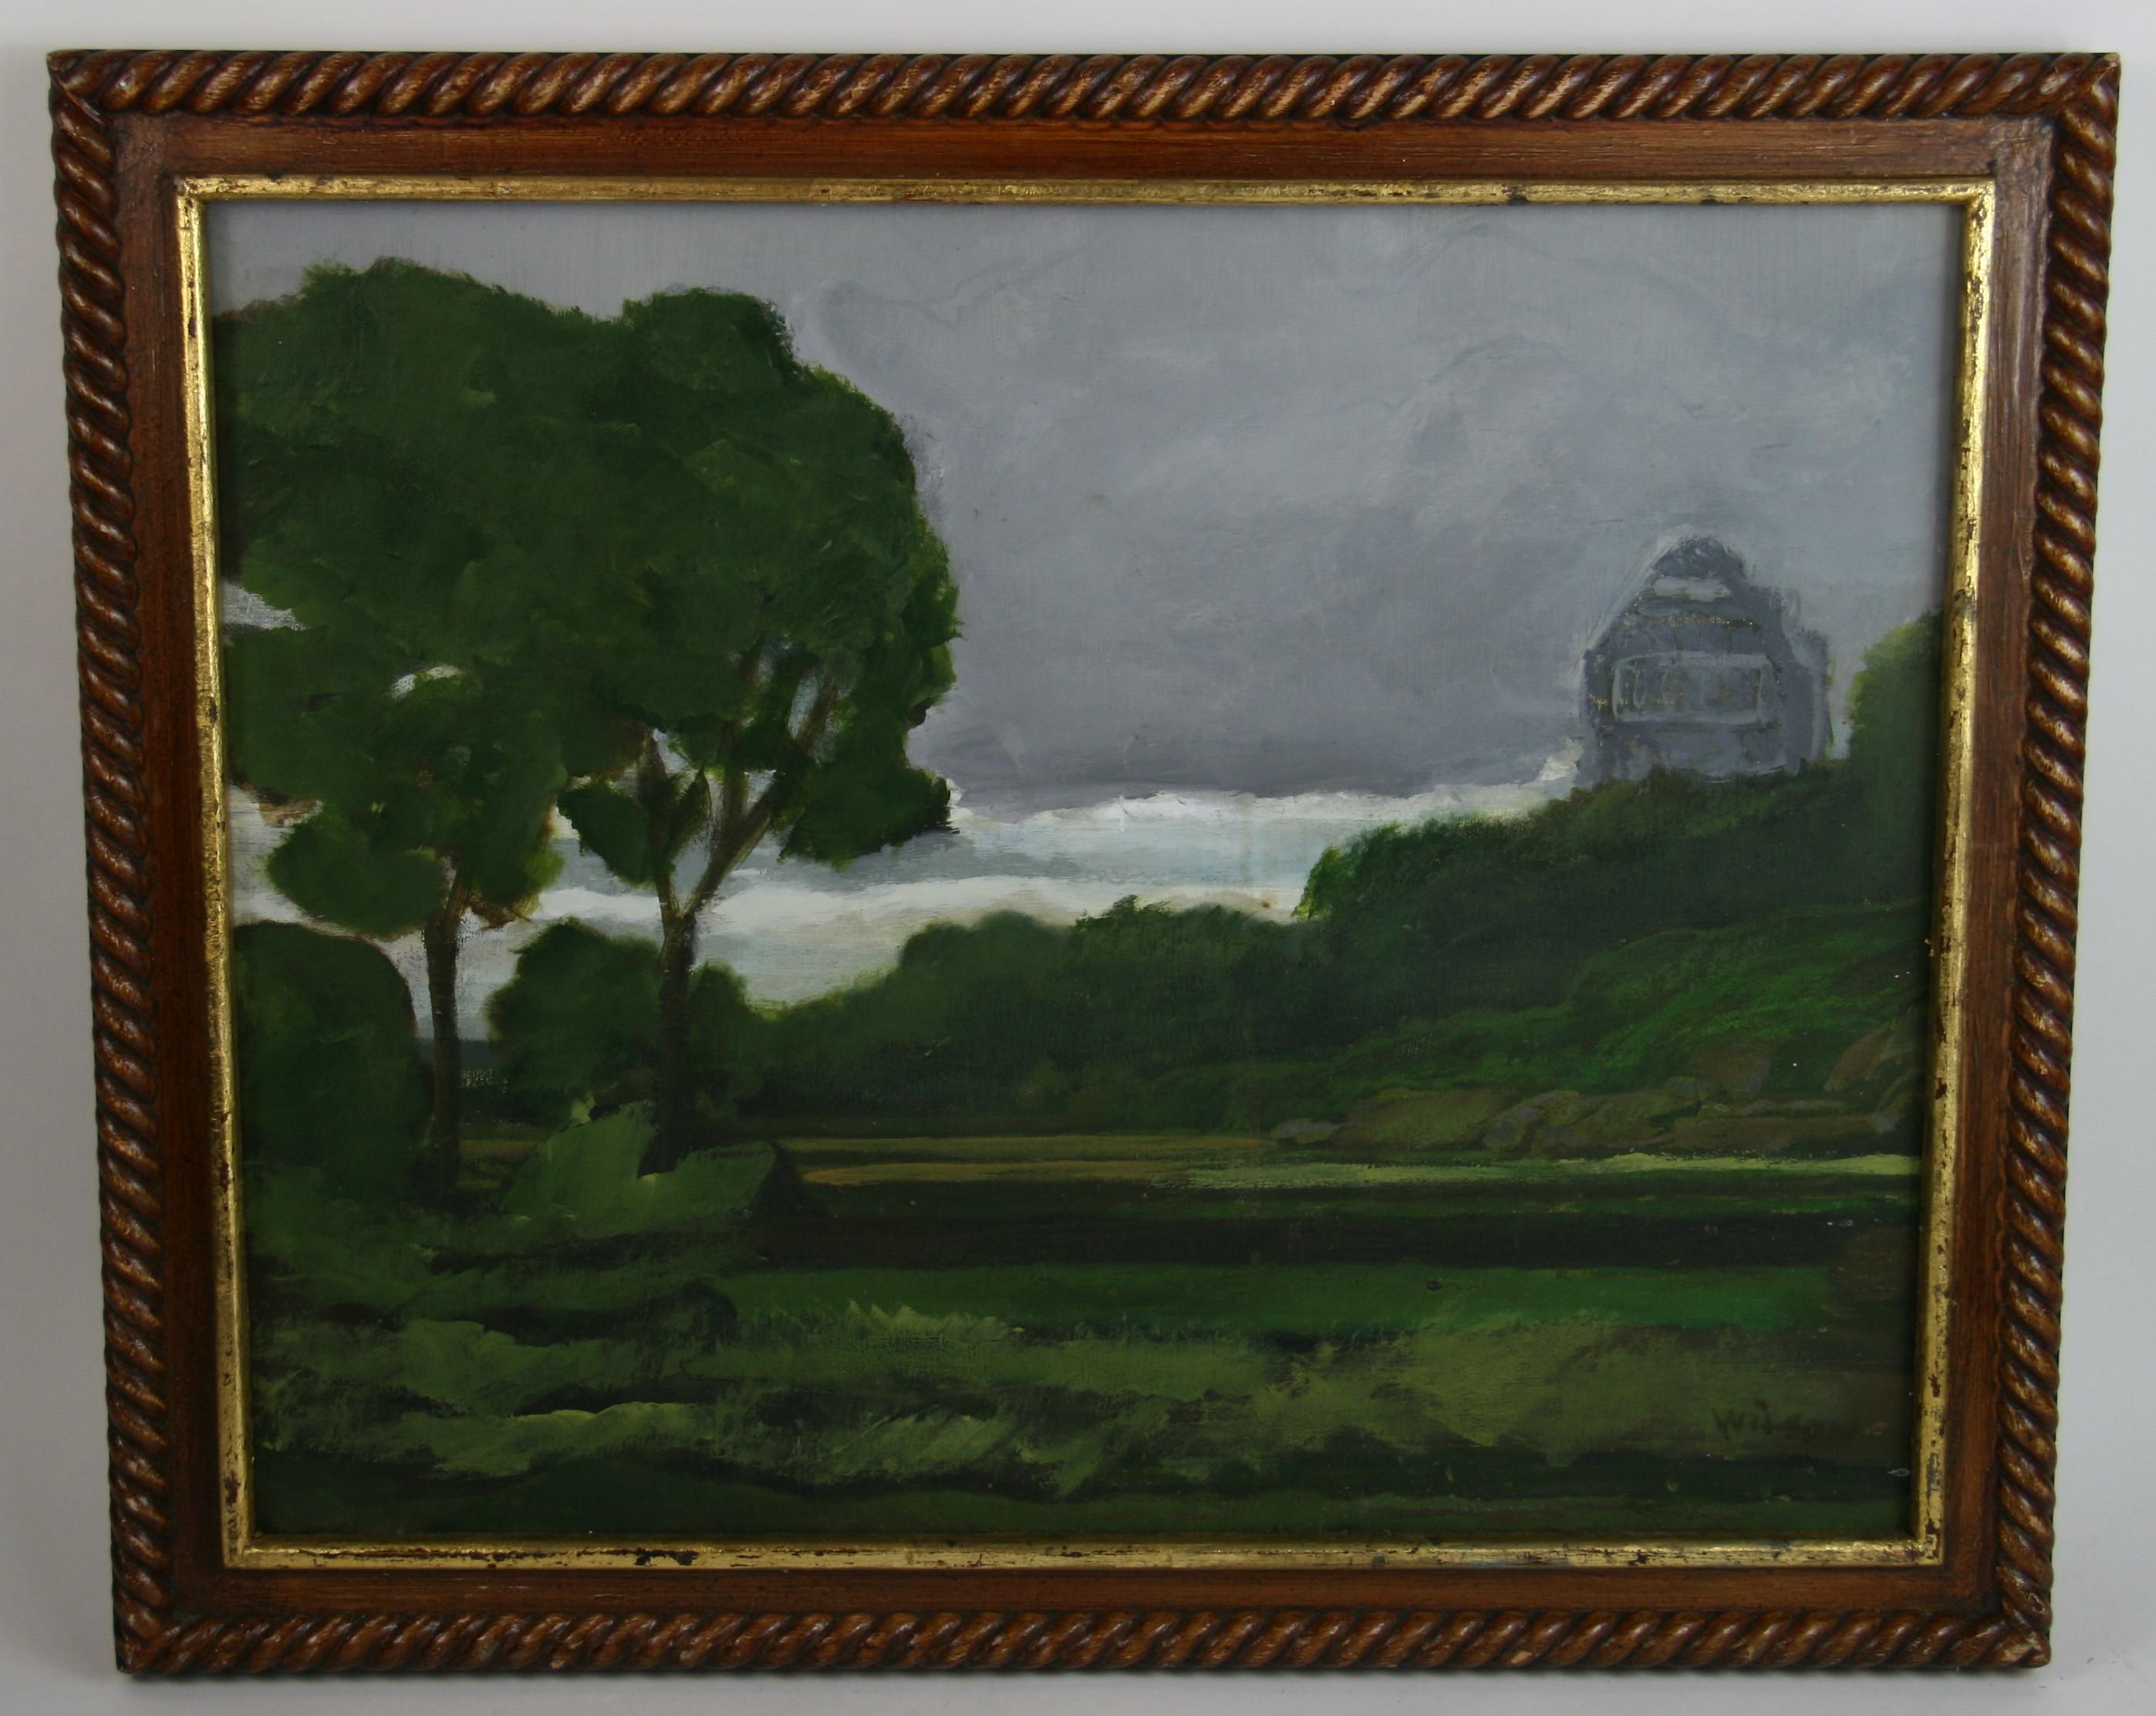 3781 Oil on board set in a braded vintage wood frame
Image size 15.5x19.5